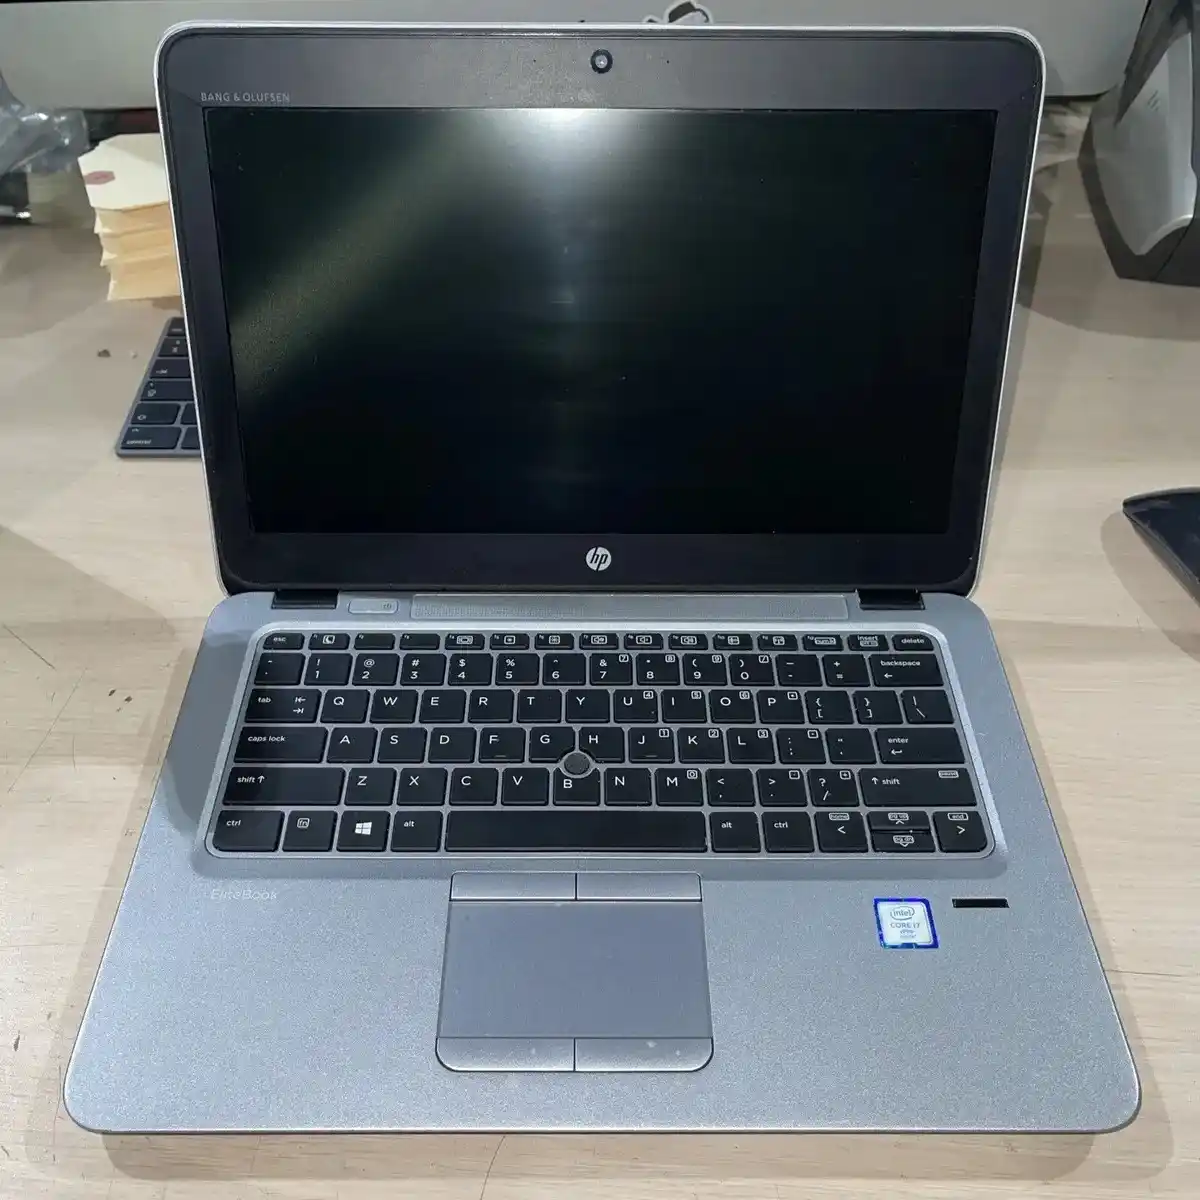 Hp Elitebook 820 G3 Core I5 6Th Gen Ram 8Gb Hdd 500 Speed 2.5Ghz Inch 12.5' Battery 3Hrs  Non-Touch Full Installation. 